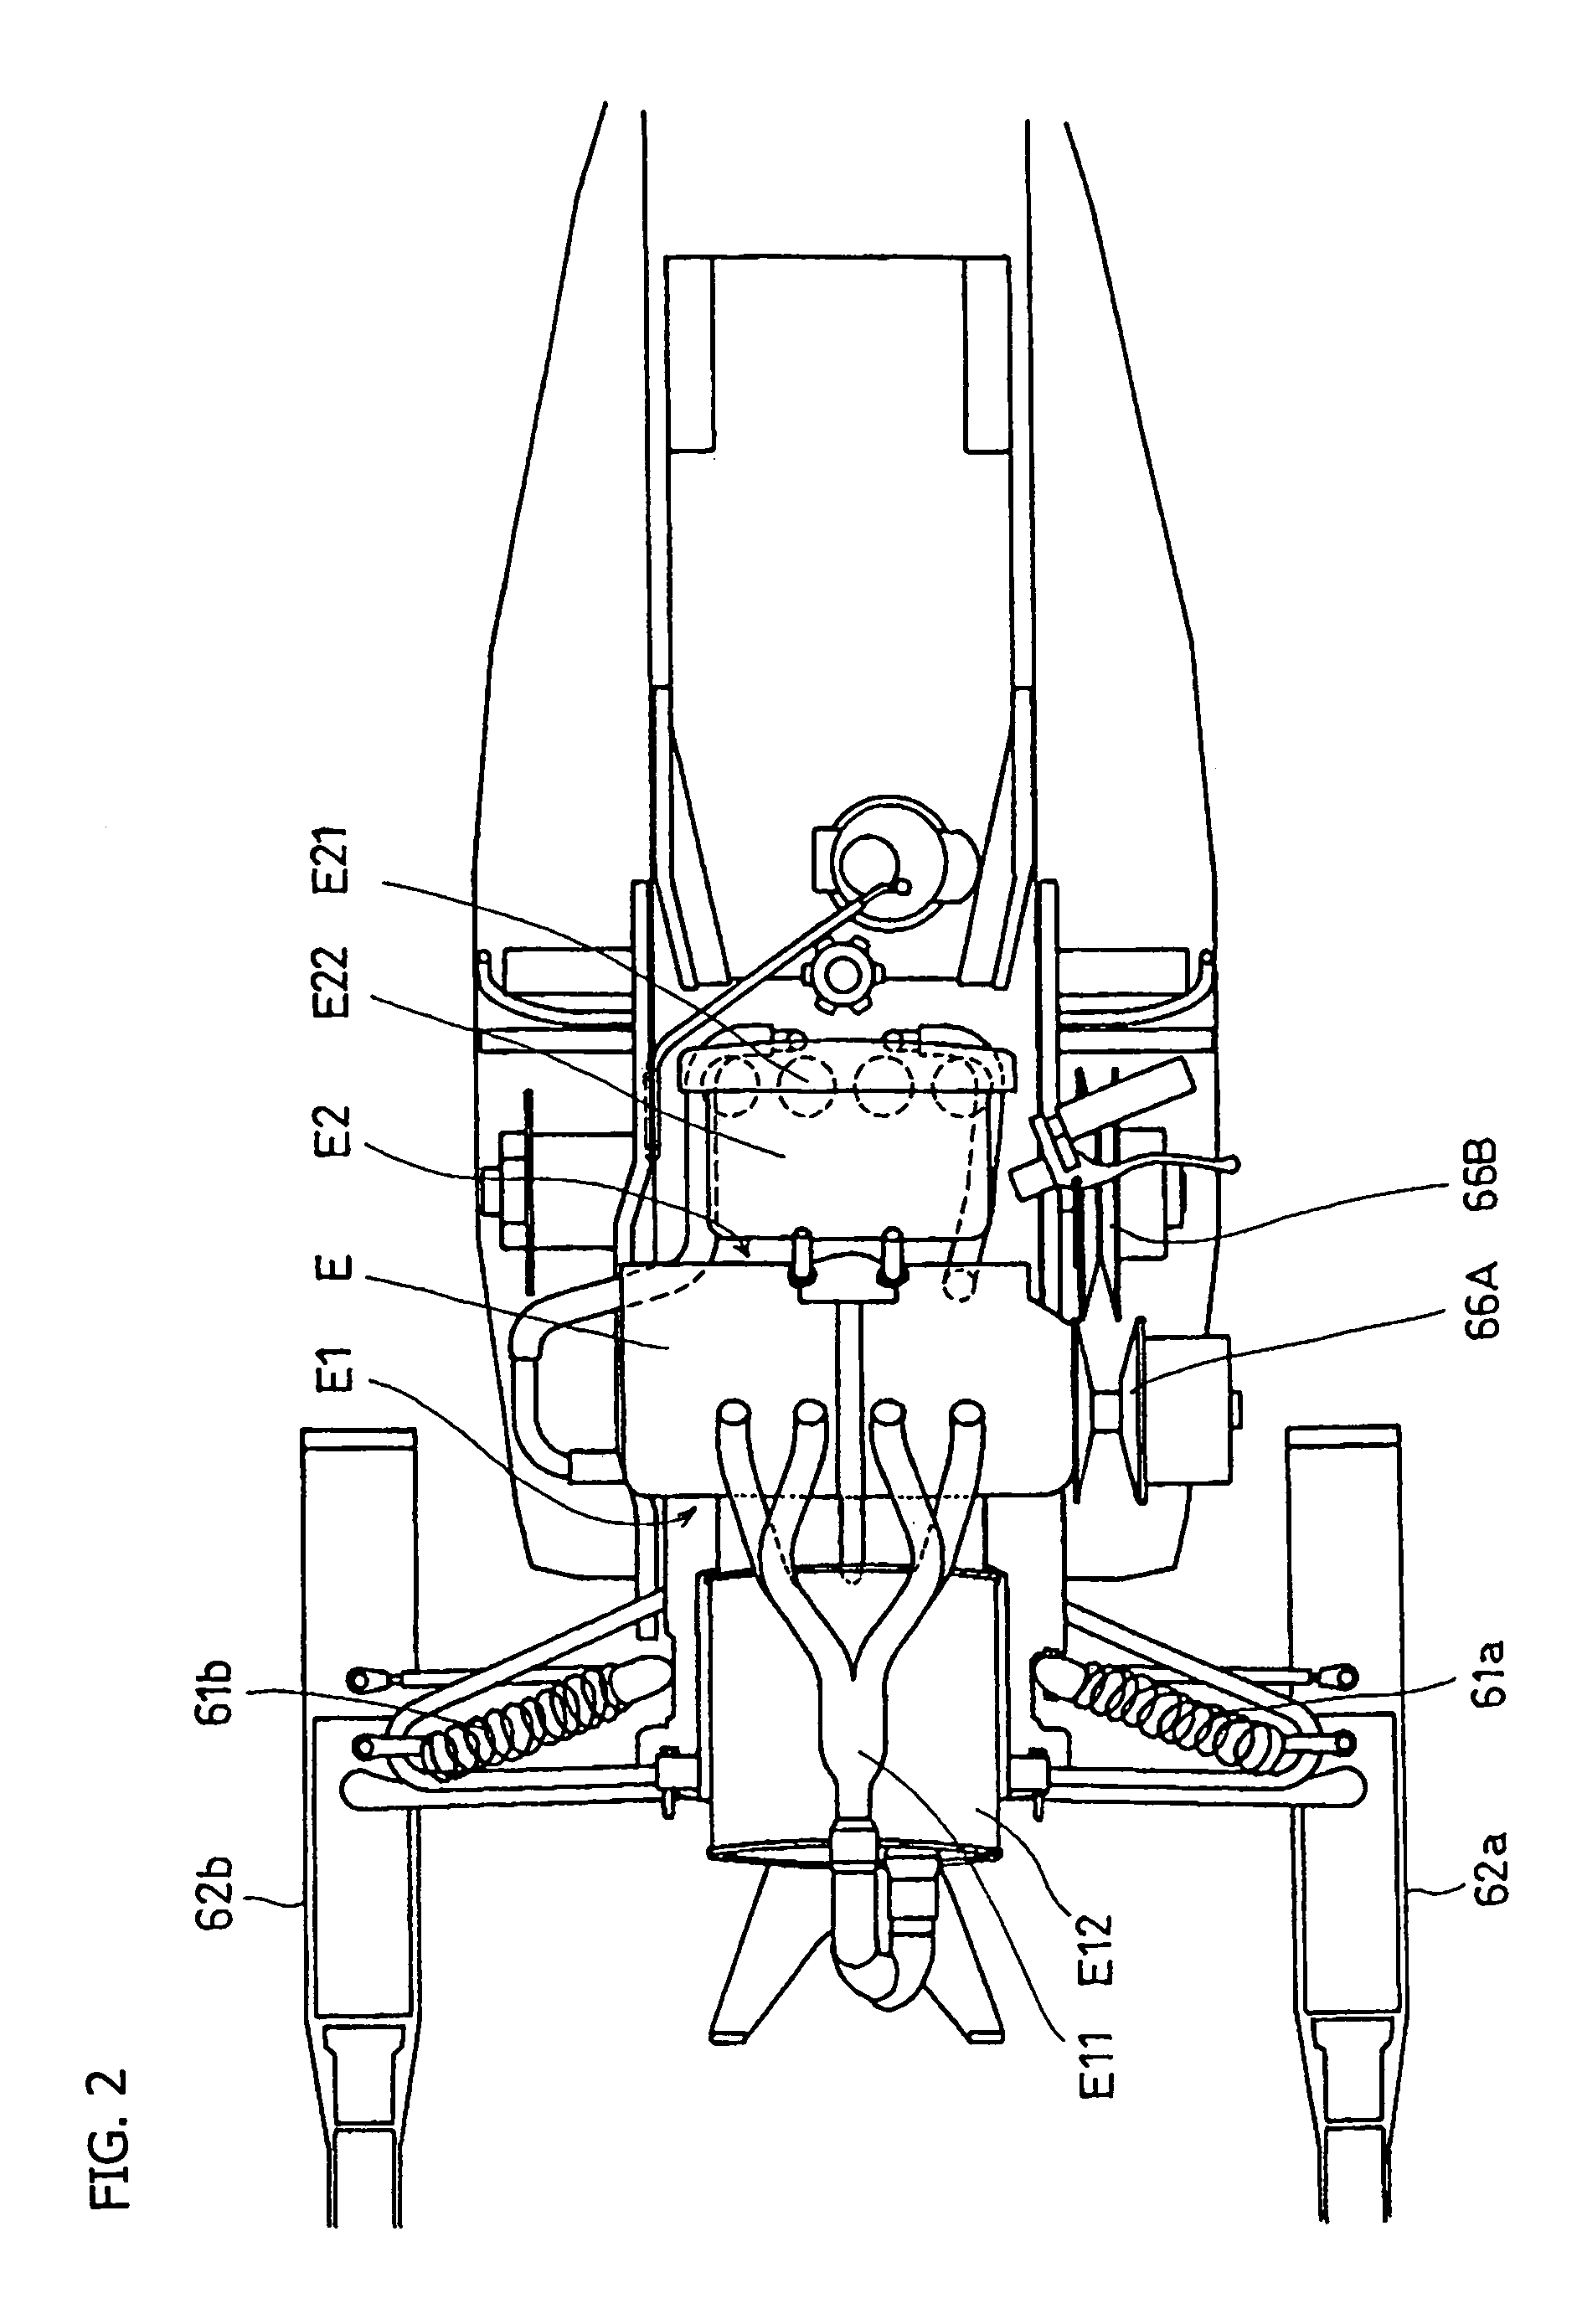 Snowmobile, and the arrangement of the engine and accessory components thereof